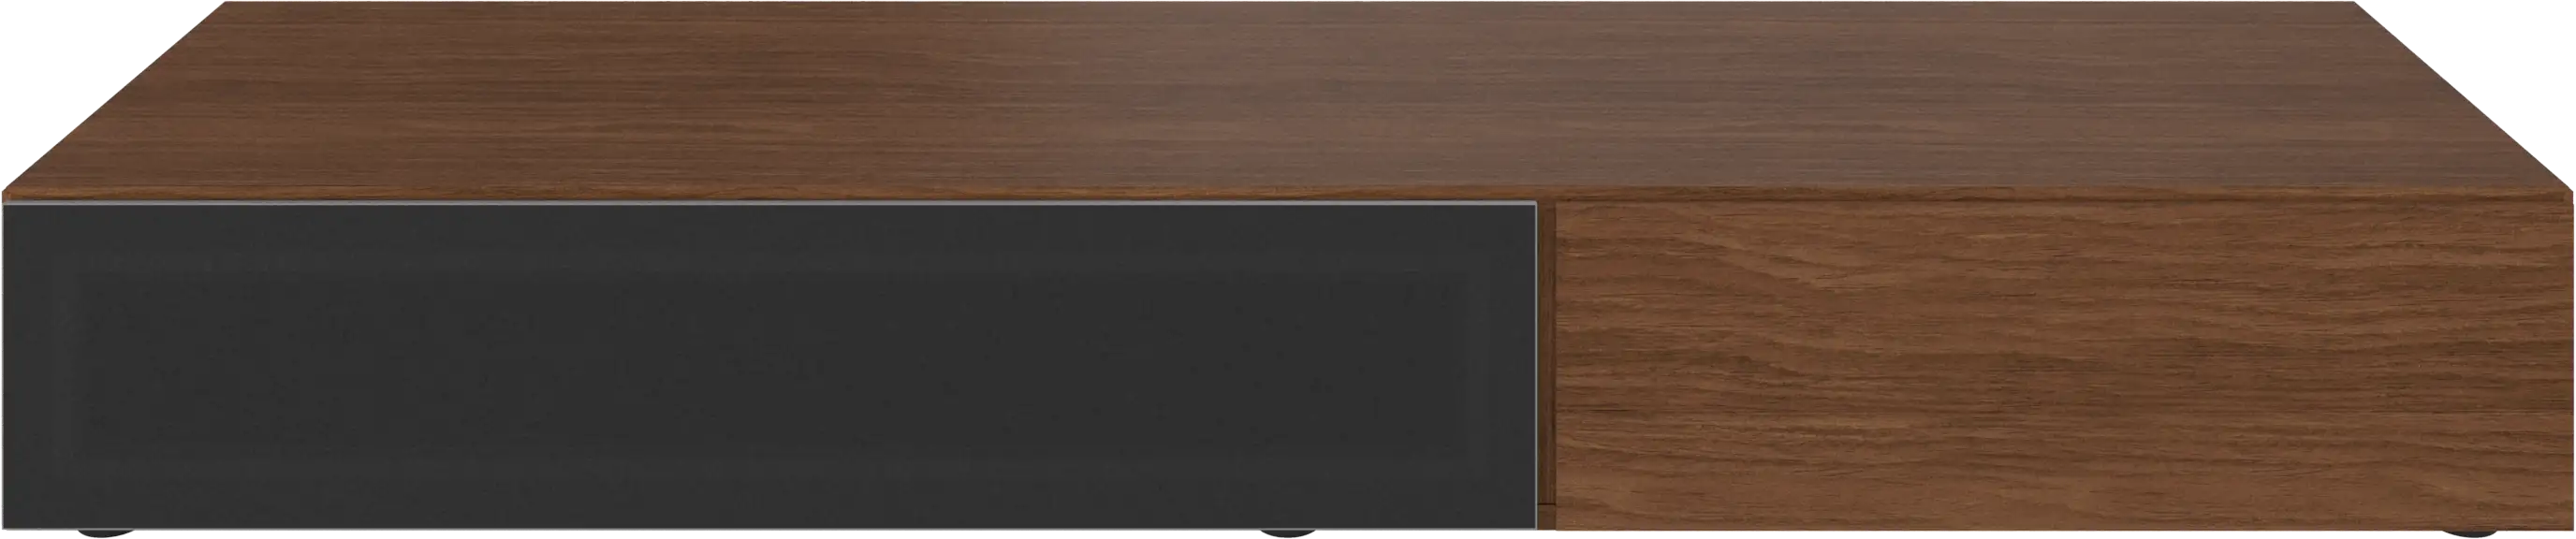 Lugano base cabinet with drawer and drop-down door